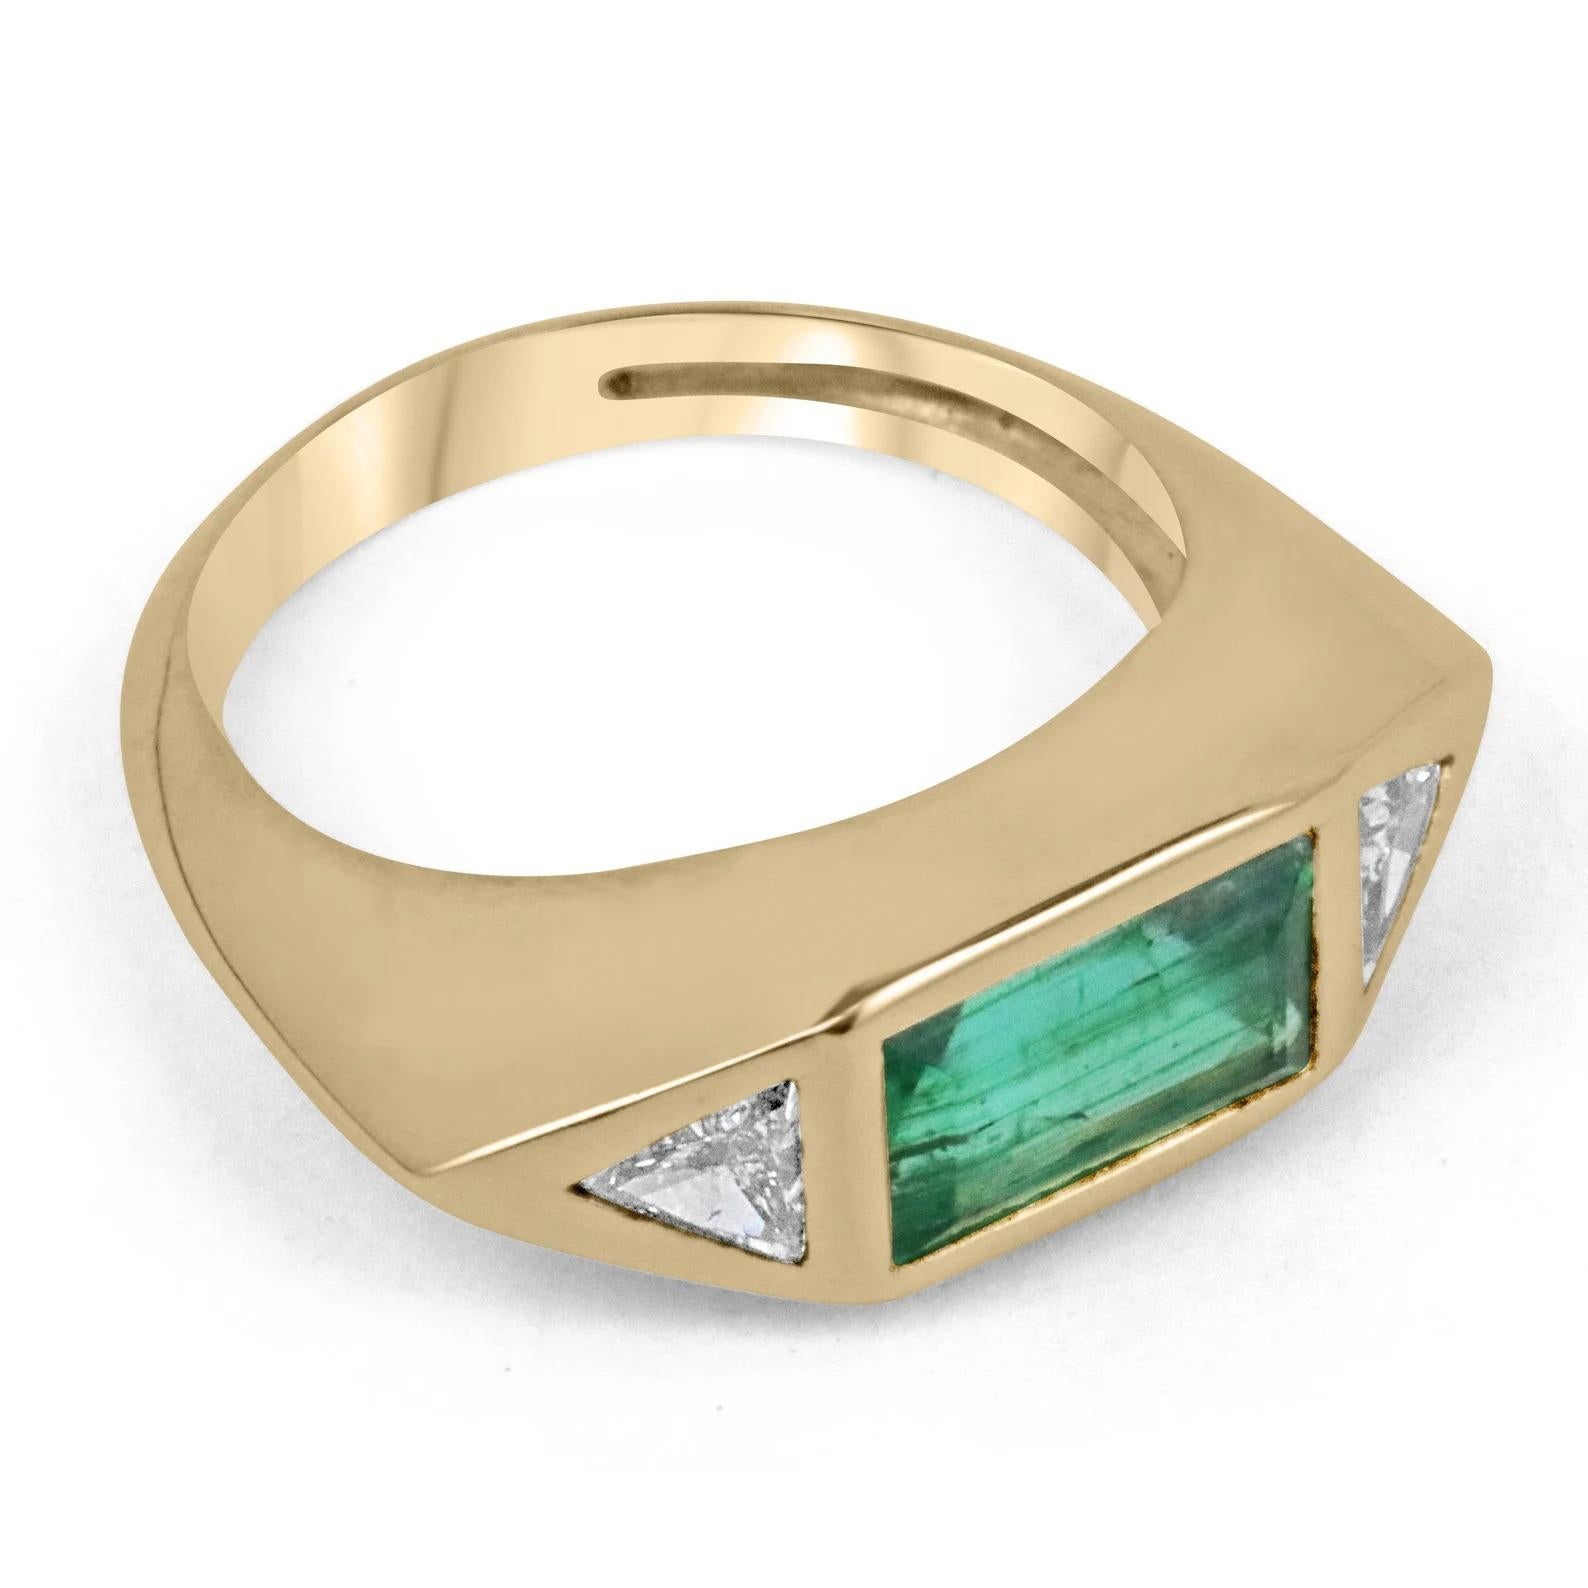 Featured here is a one-of-a-kind, breathtaking, FINE quality heirloom emerald and diamond three-stone ring in solid 18K. The center stone is a stunning 2.00-carat, natural emerald-baguette cu. The baguette cut is one of the rarest shapes for an